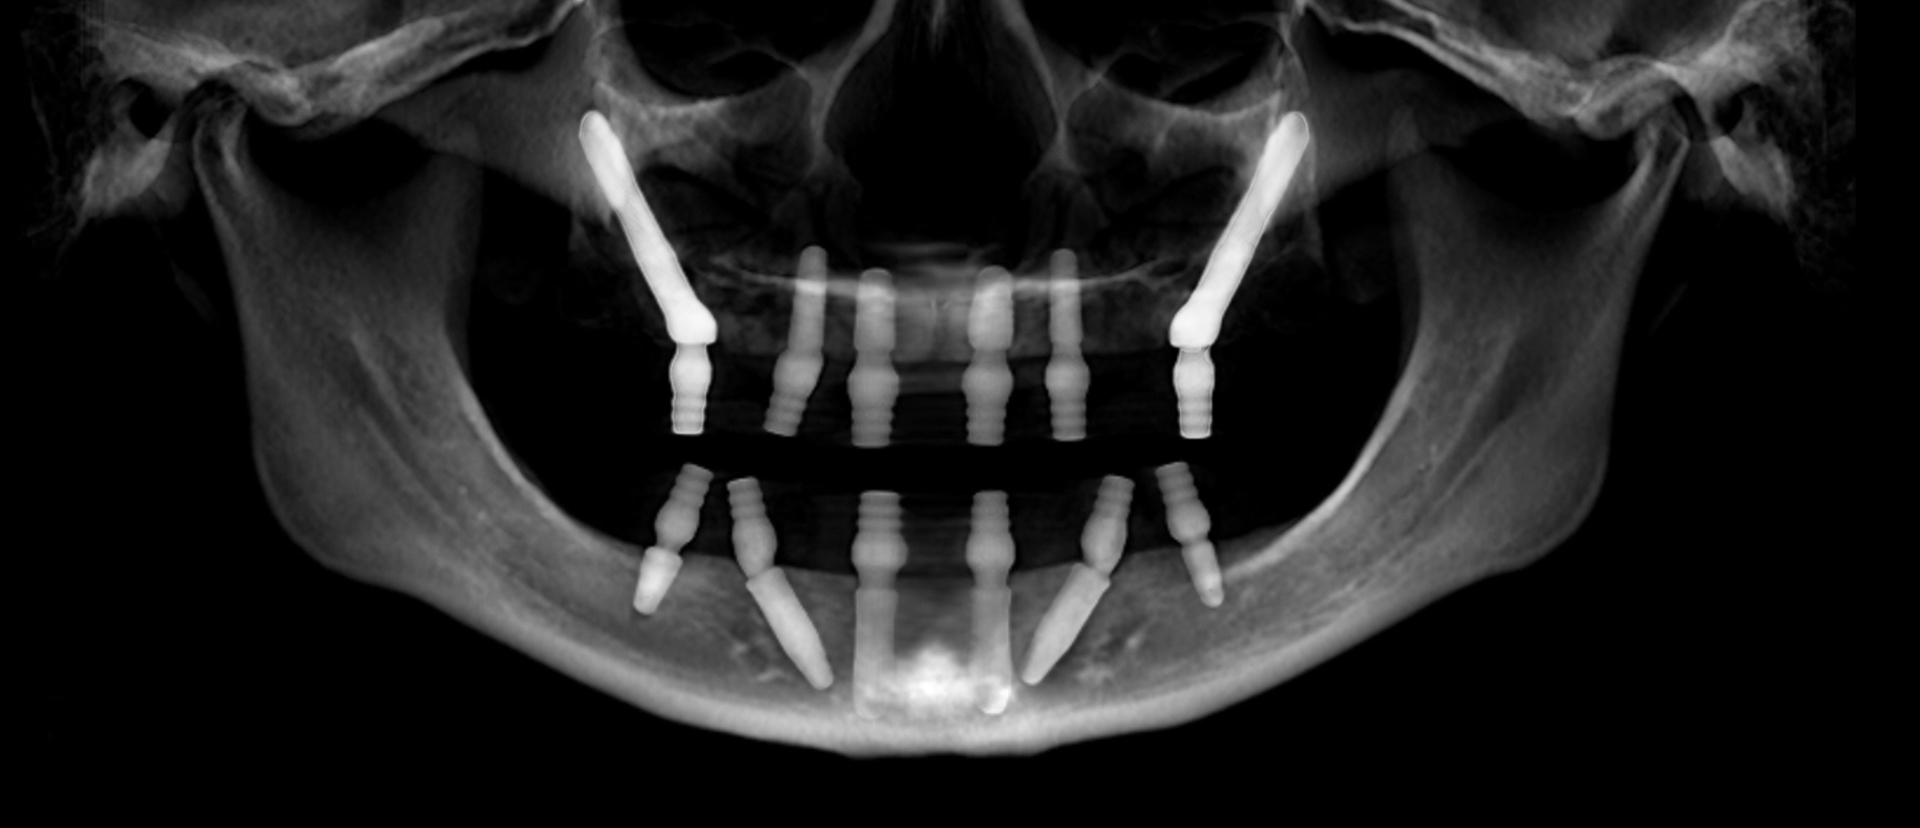 zygomatic implants highlighting the reach of the longer implants into the zygoma